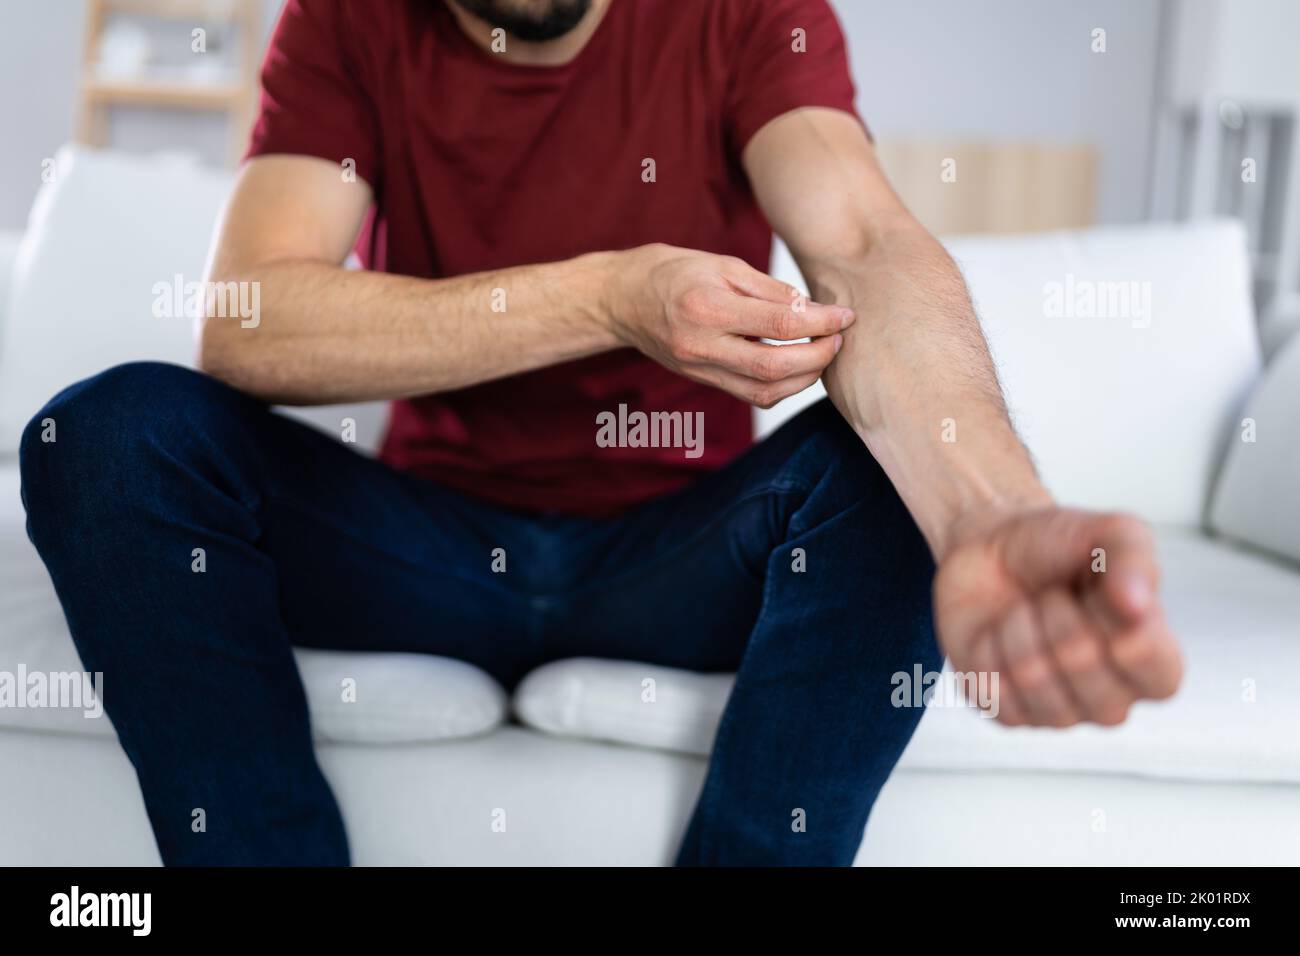 Man With Itchy Skin. Allergy Or Psoriasis Stock Photo